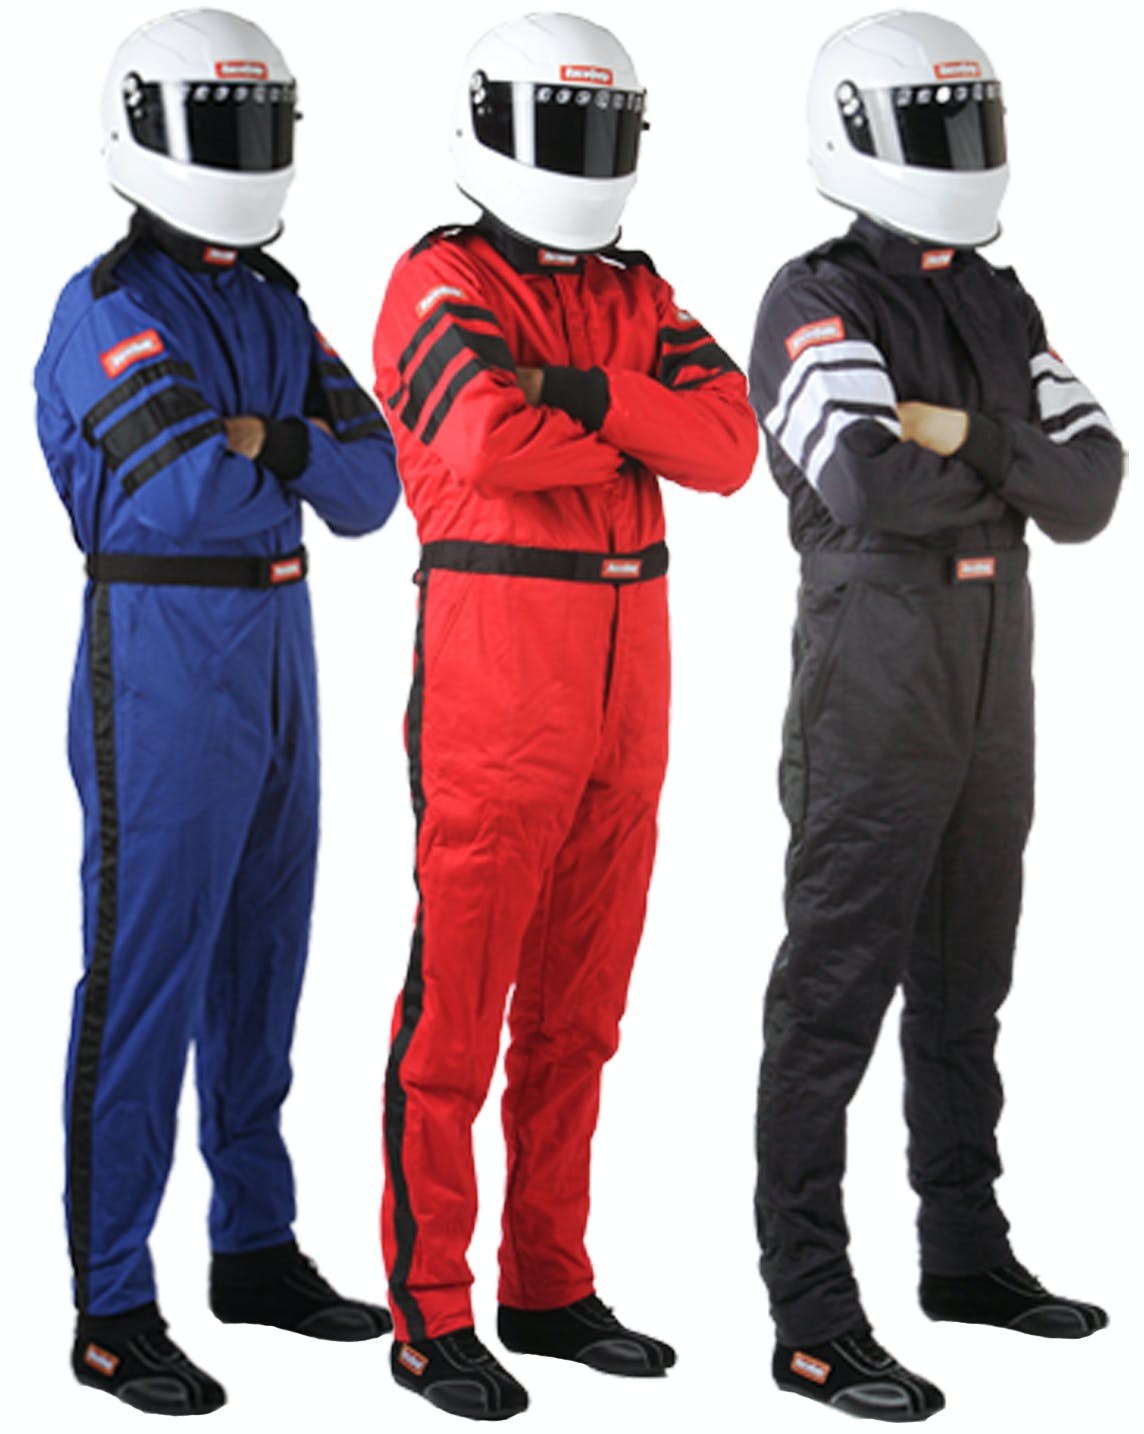 RaceQuip 120015 SFI-5 Pyrovatex One-Piece Multi-Layer Racing Fire Suit (Red, Large)